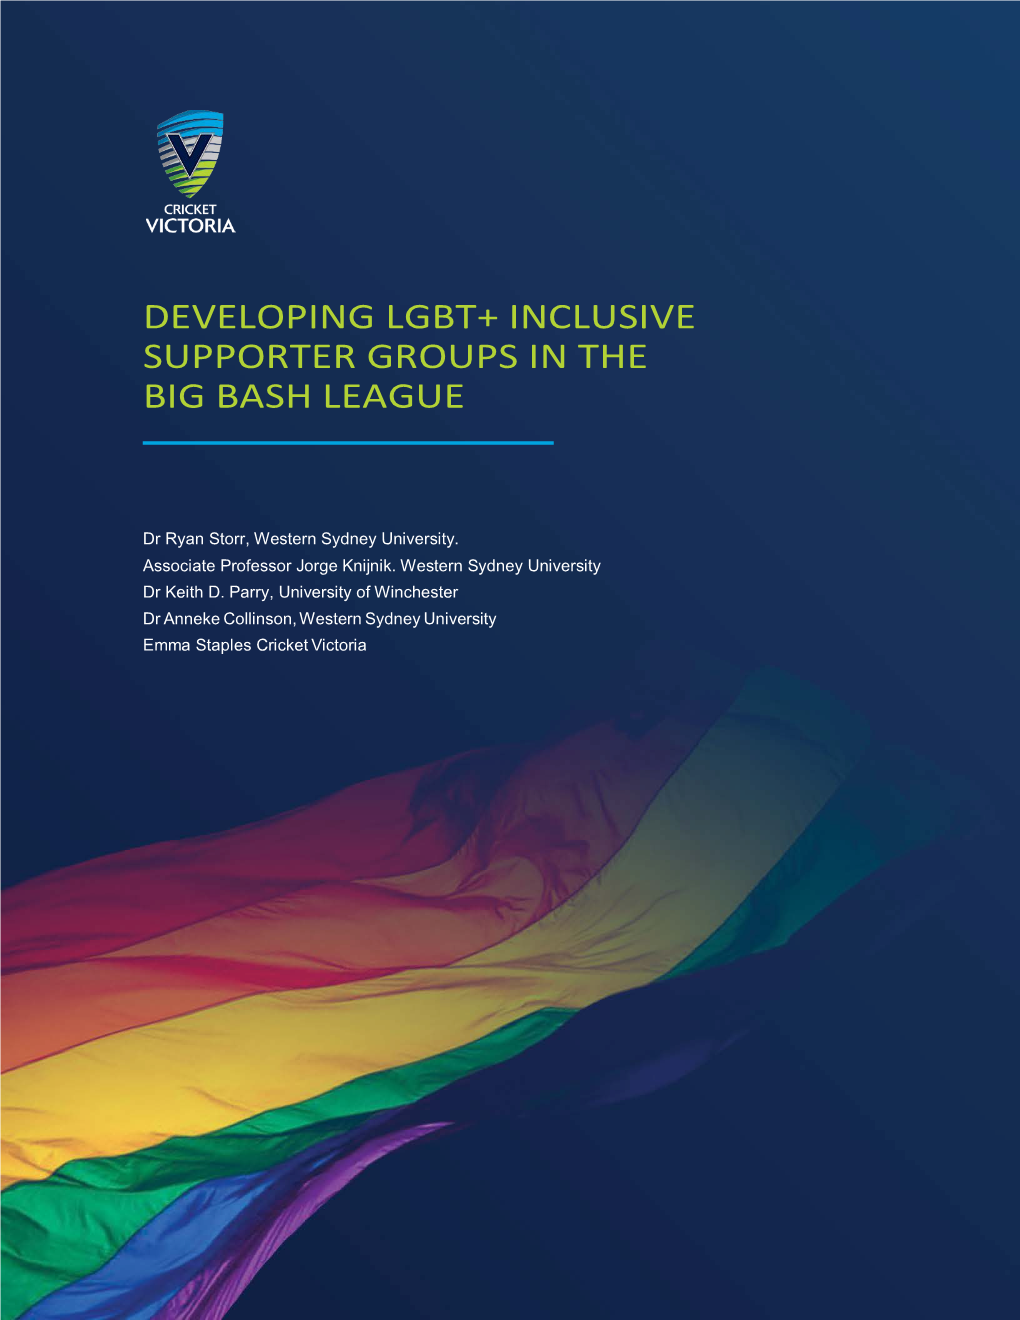 Developing Lgbt+ Inclusive Supporter Groups in the Big Bash League